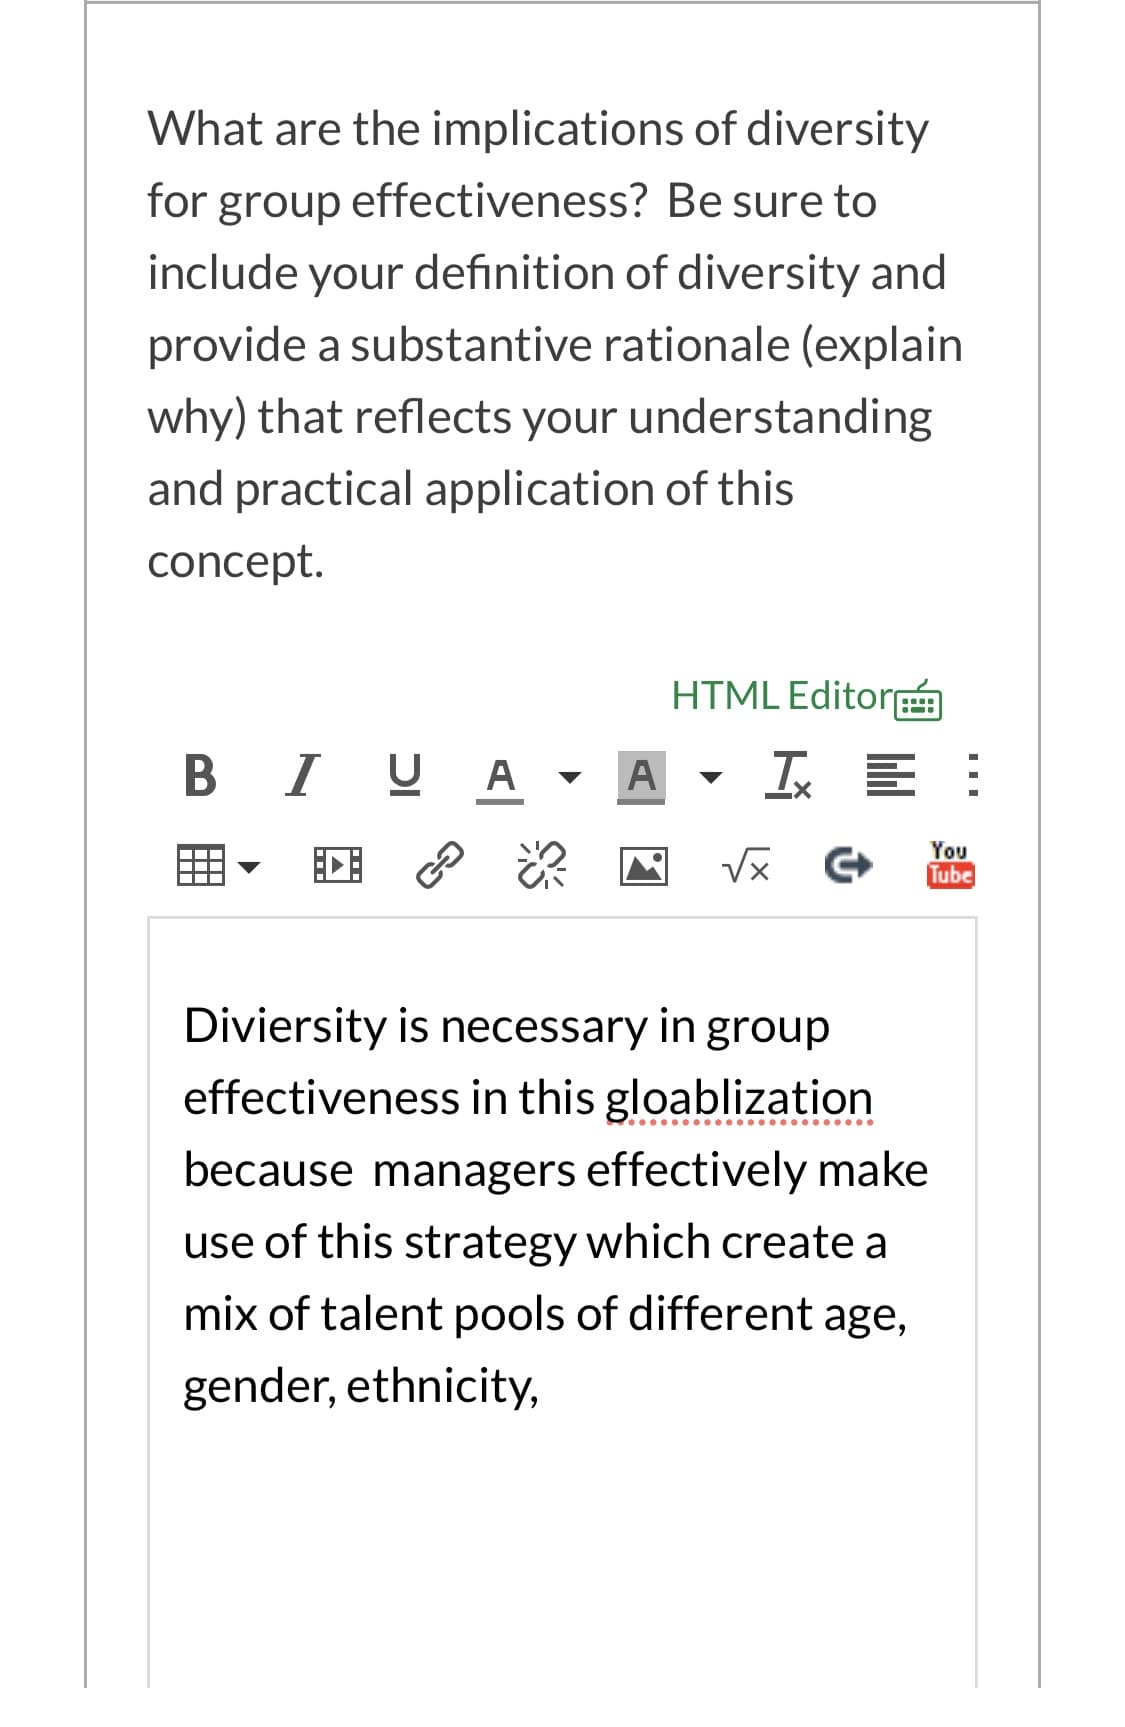 What are the implications of diversity
for group effectiveness? Be sure to
include your definition of diversity and
provide a substantive rationale (explain
why) that reflects your understanding
and practical application of this
concept.
HTML Editor
....
B IUA -
Ix E :
You
Tube
GJ
Diviersity is necessary in group
effectiveness in this gloablization
because managers effectively make
use of this strategy which create a
mix of talent pools of different age,
gender, ethnicity,
